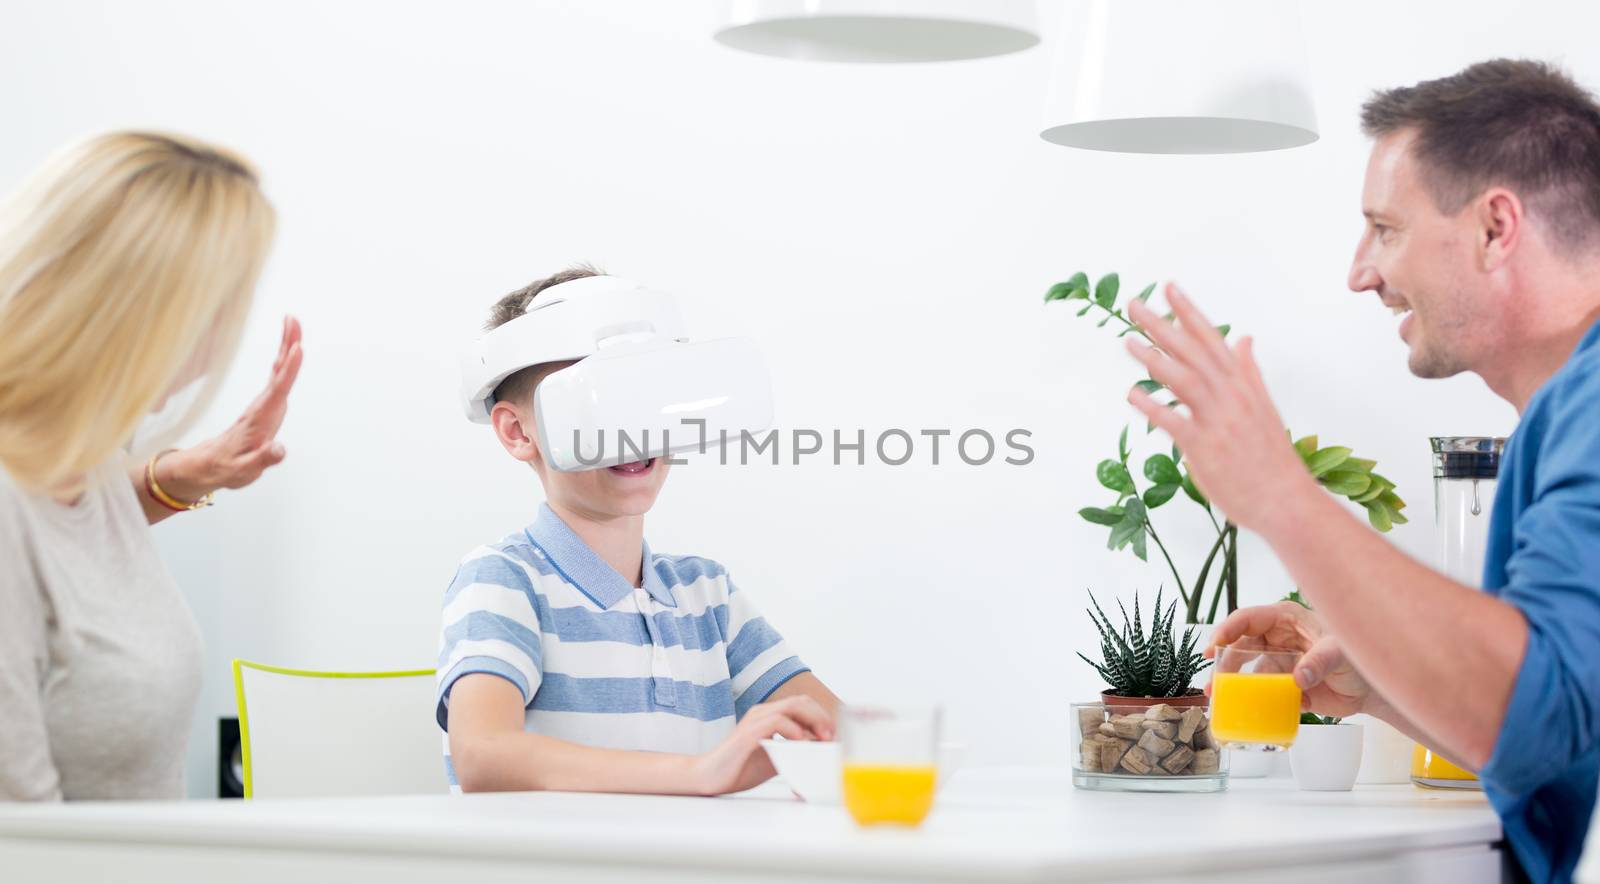 Happy caucasian family at home at dinning table, having fun playing games using virtual reality headset.